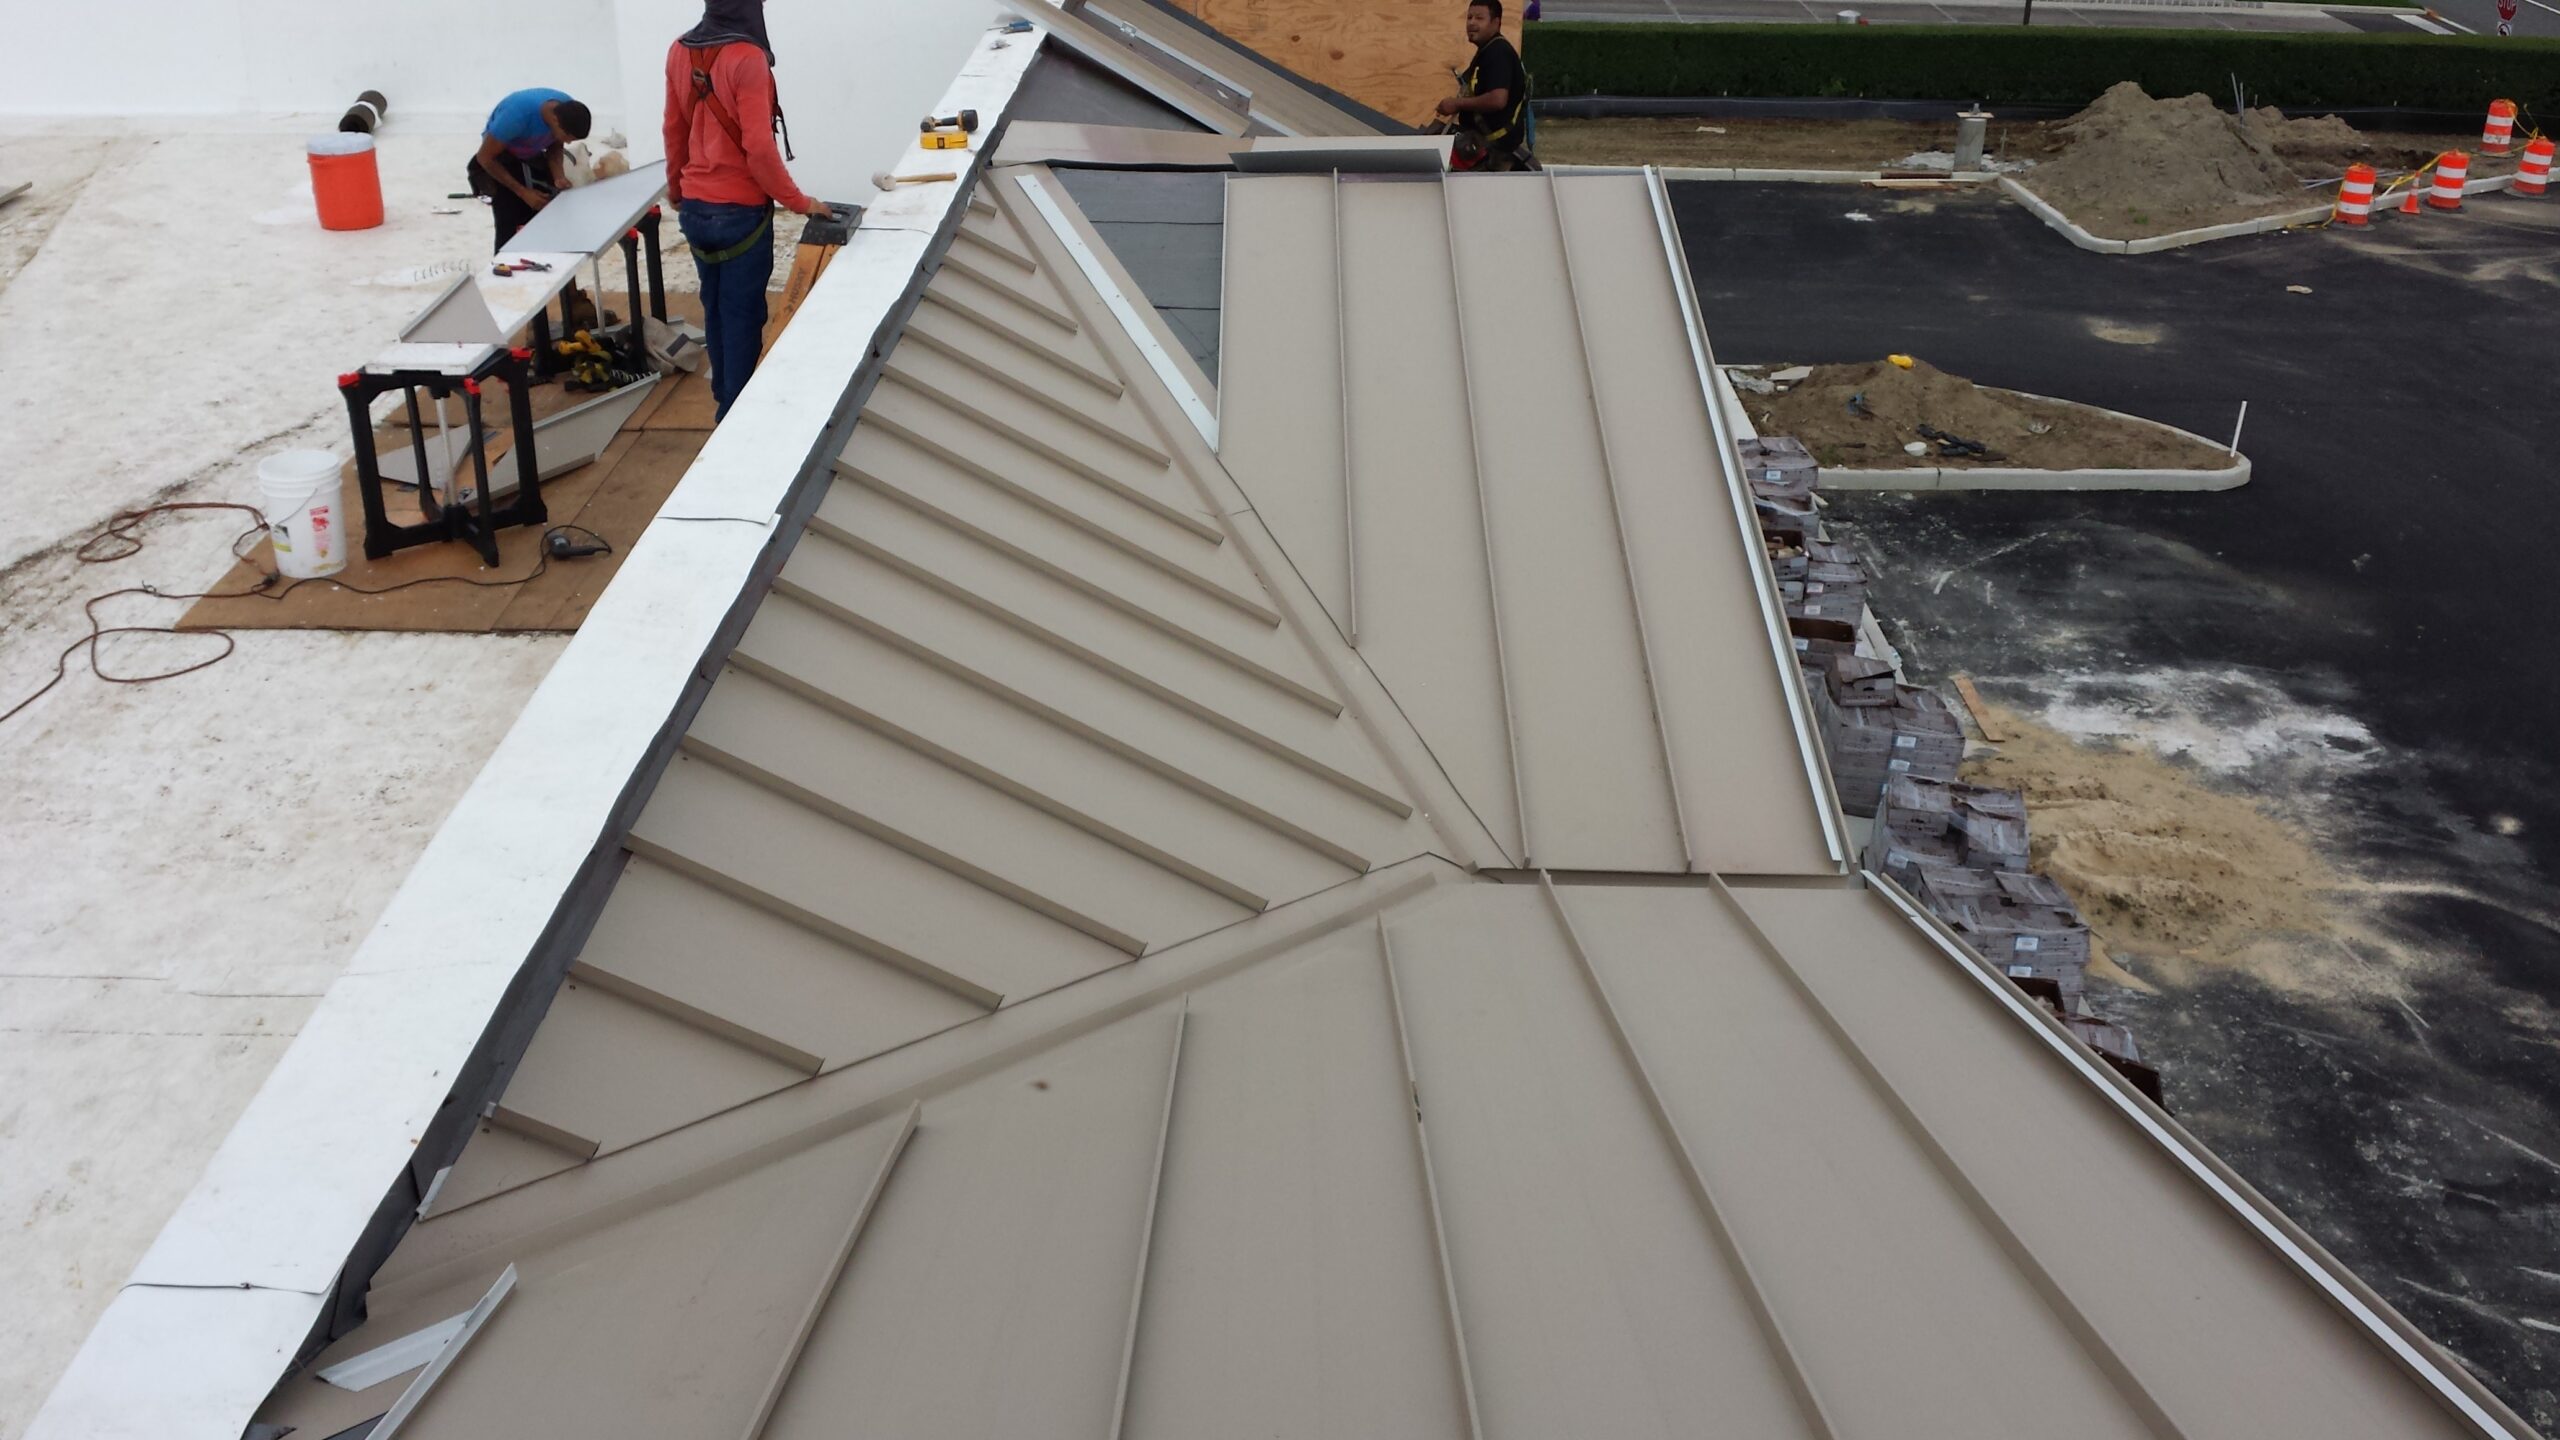 Commercial Roofing Systems